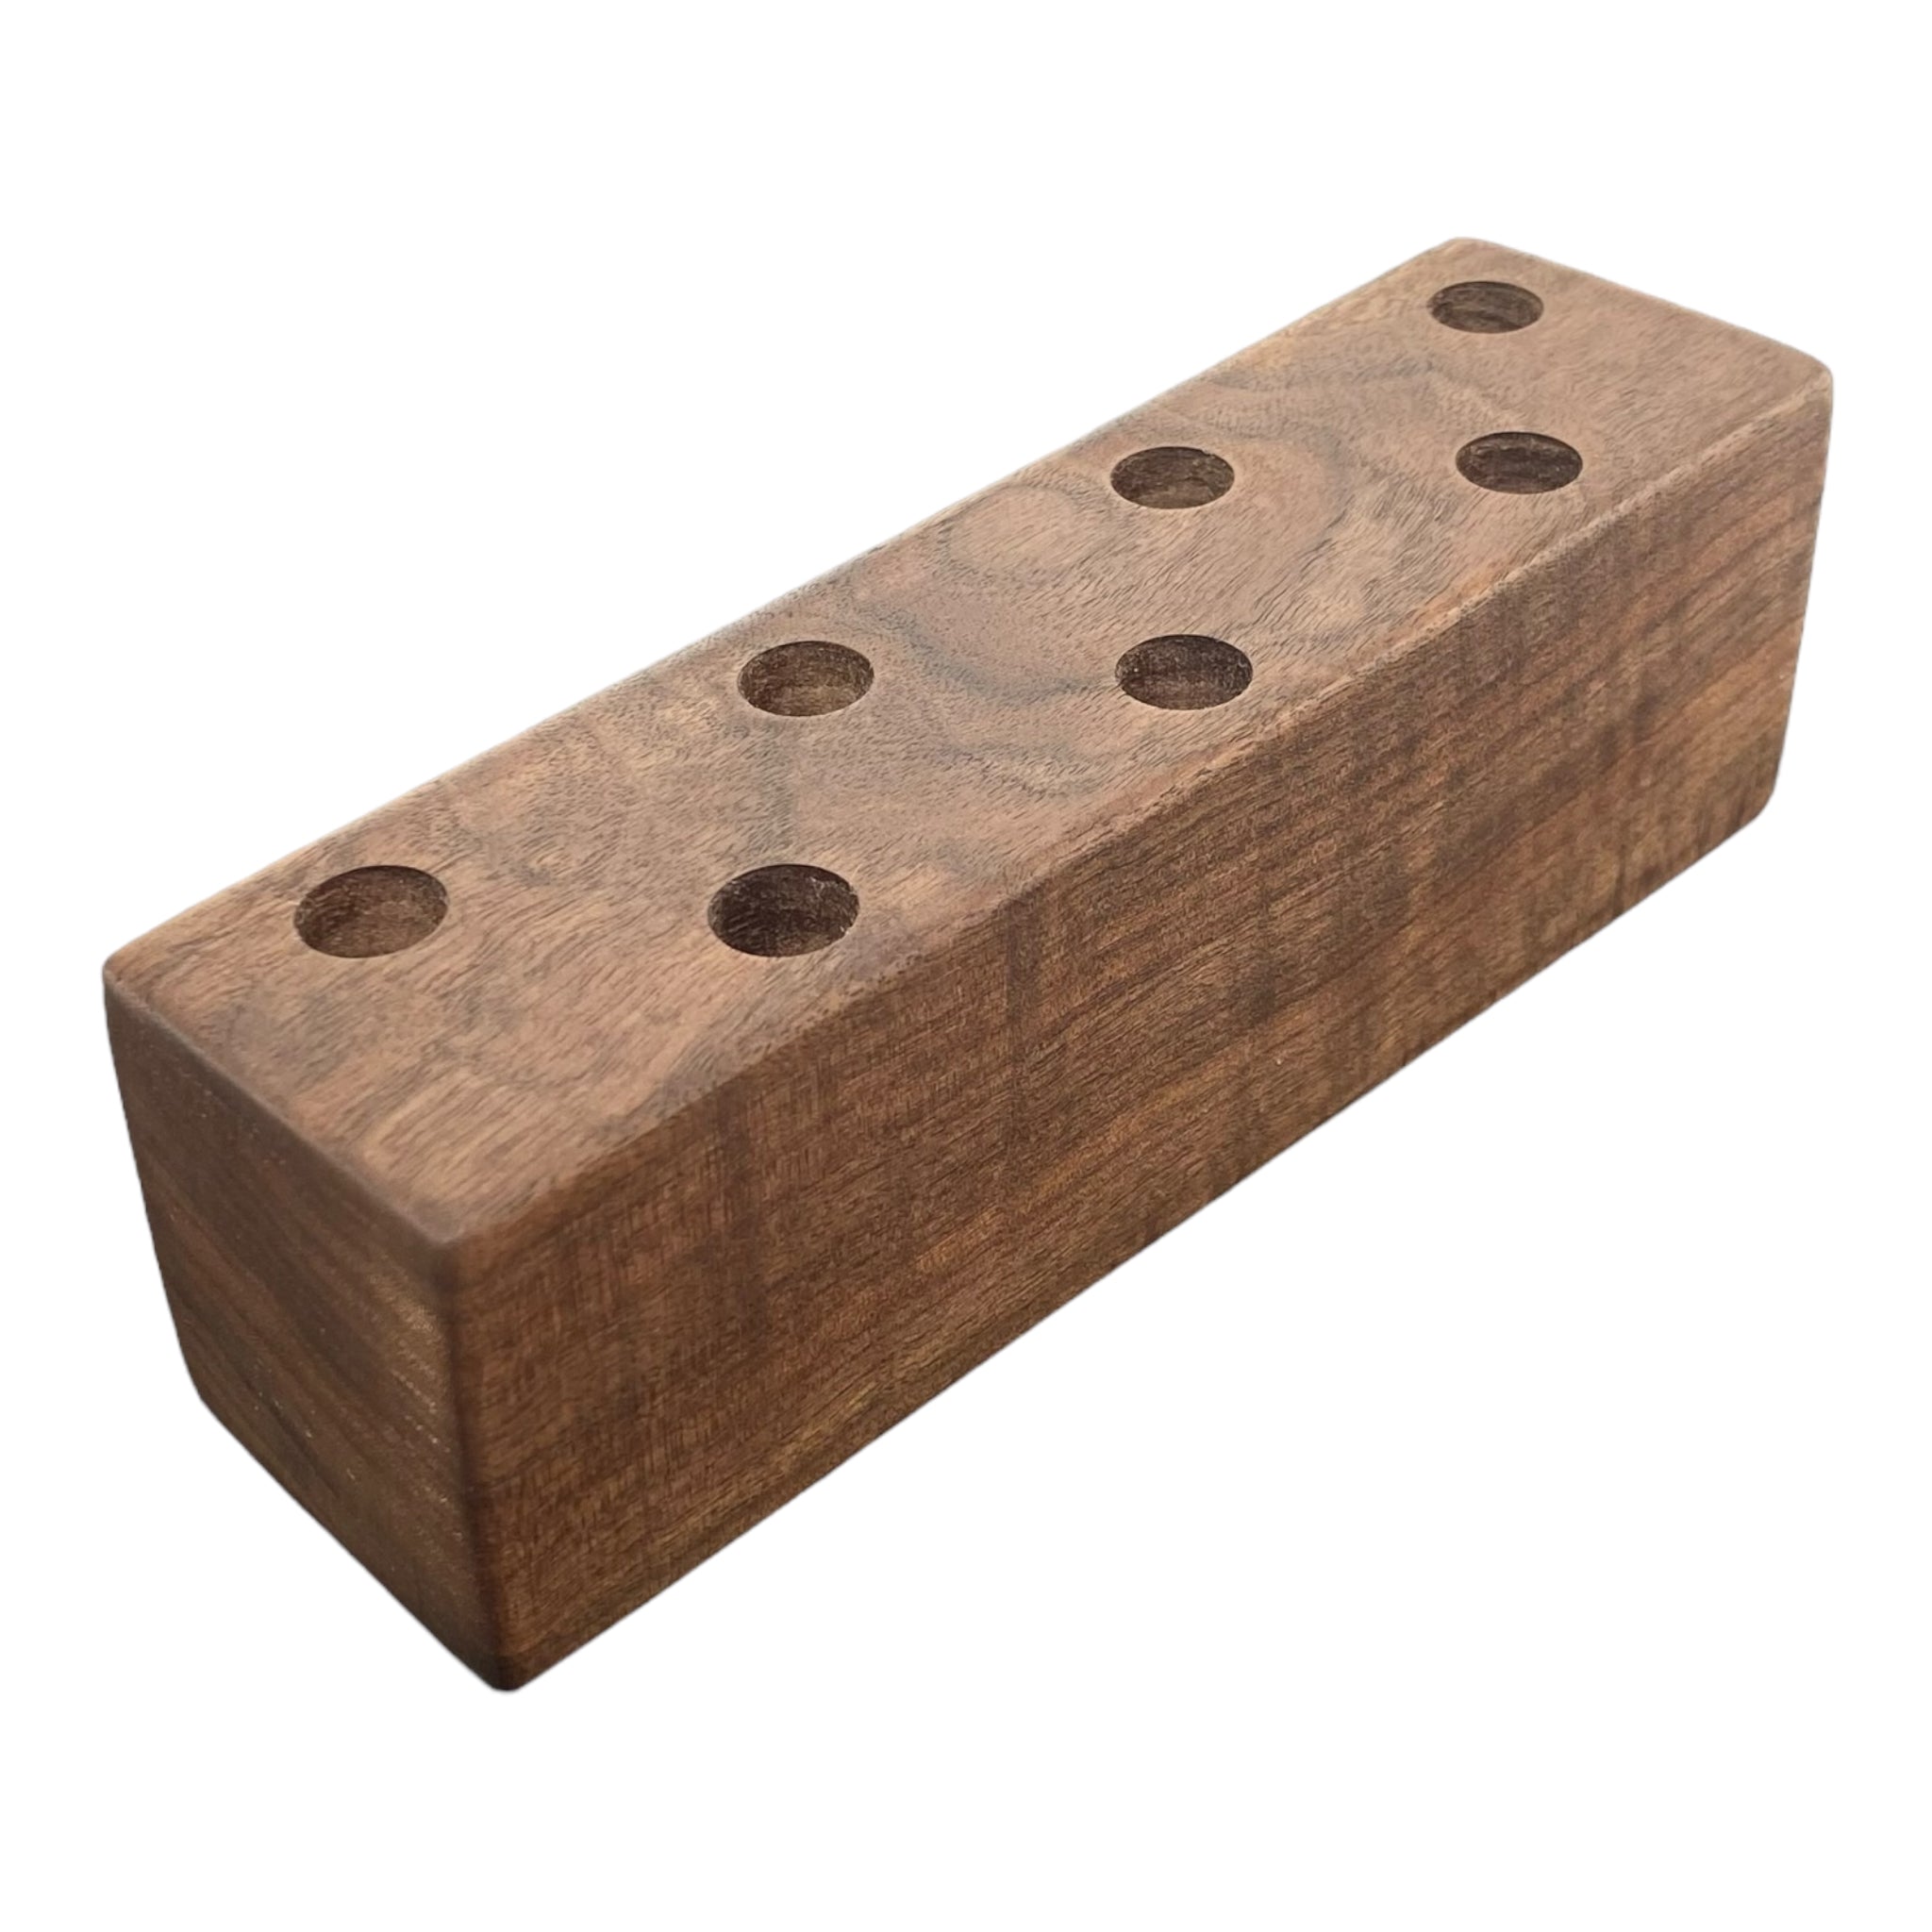 7 Hole Wood Display Stand Holder For 14mm Bong Bowl Pieces Or Quartz Bangers - Black Walnut #2